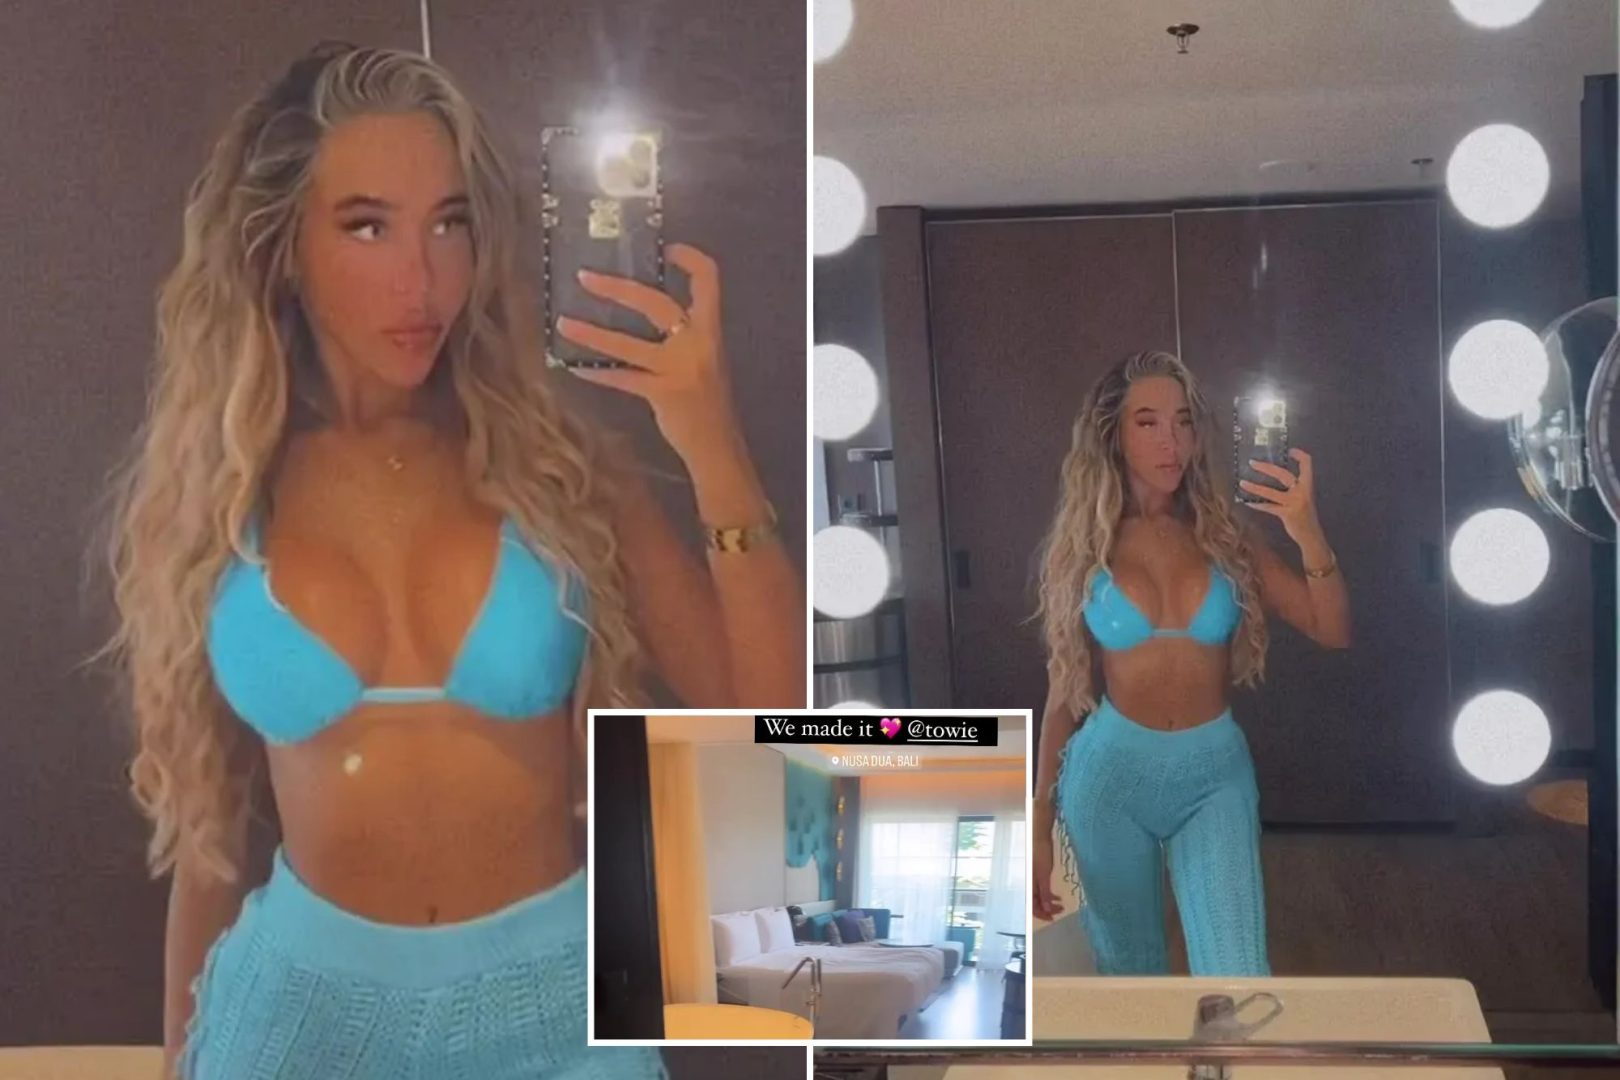 Dani Imbert Flaunts Her New Look in Bali with Towie Co-Stars